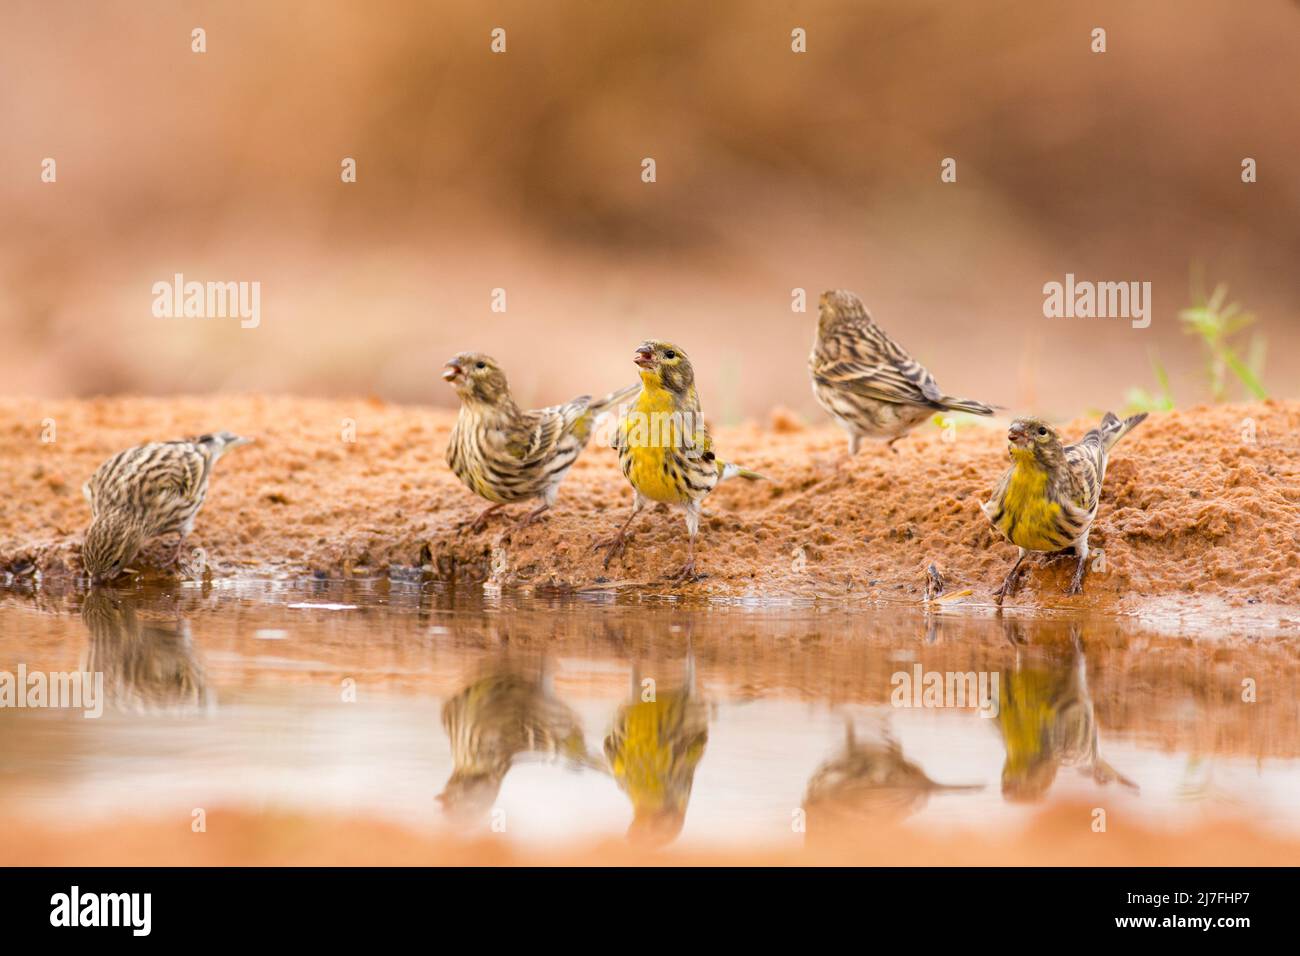 European serin (Serinus serinus). This is the smallest European species of the family of finches (Fringillidae) and is closely related to the Canary. Stock Photo